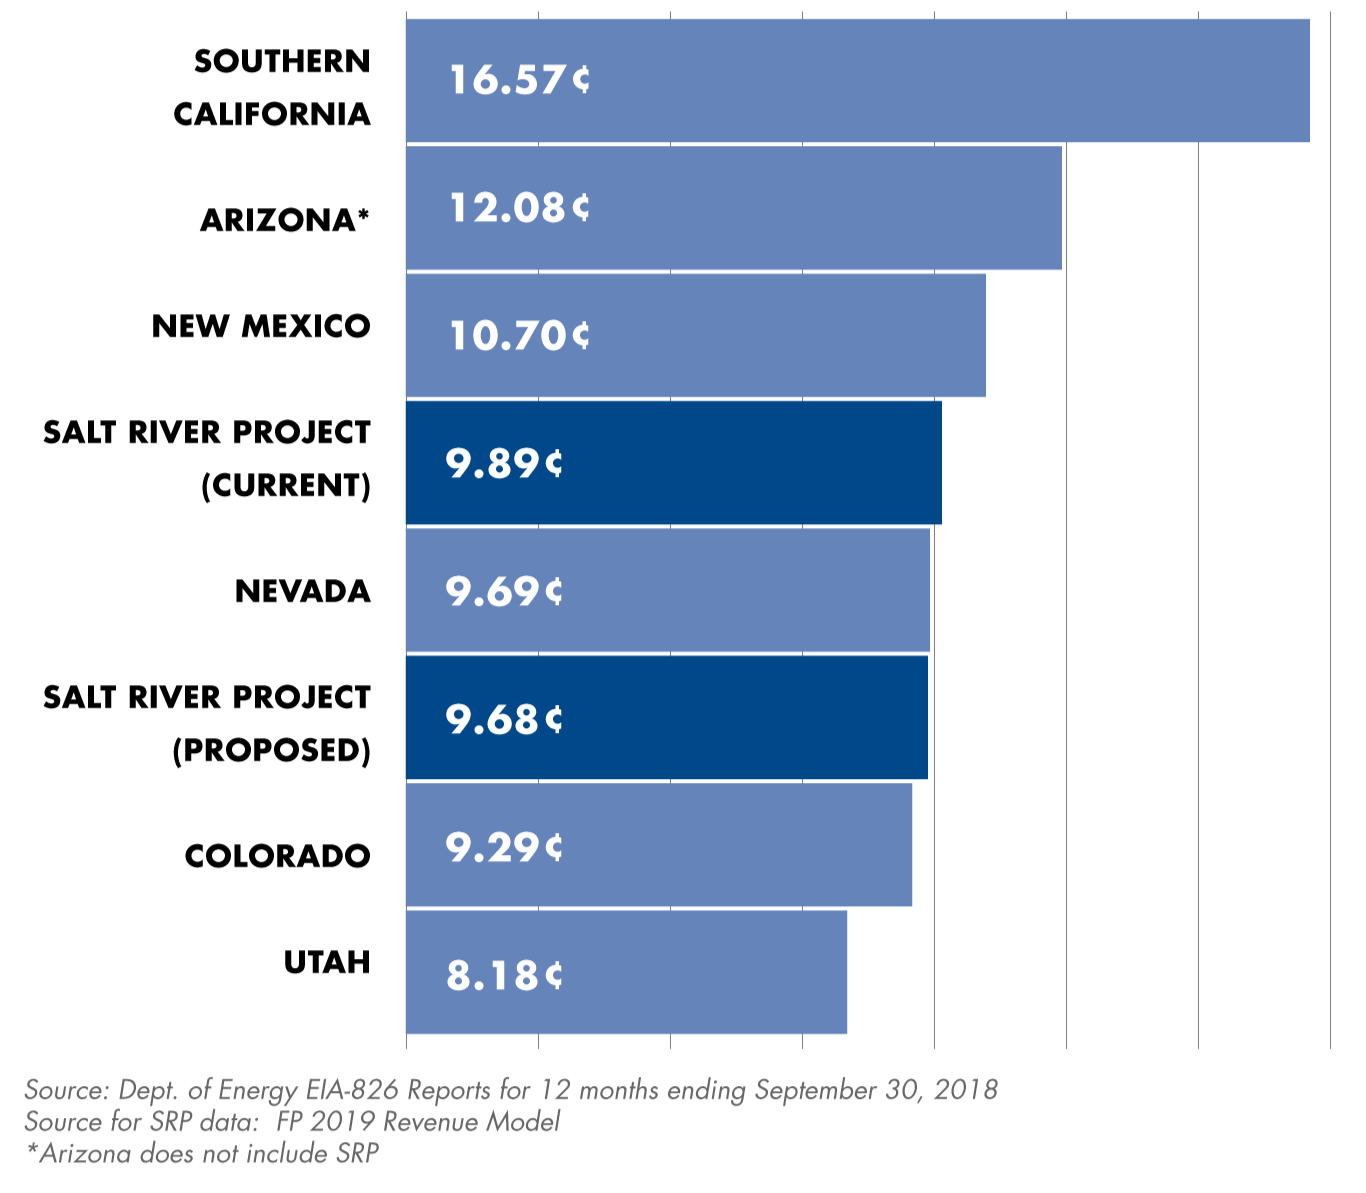 Graphic illustrating how SRP compares with other utilities in Arizona and other Southwest states. From top to bottom: Southern California: 16.57 cents, Arizona (does not include SRP): 12.08 cents, New Mexico: 10.70 cents, SRP current: 9.89 cents, Nevada: 9.69 cents, SRP proposed: 9.68 cents, Colorado: 9.29 cents, Utah: 8.18 cents. Source: Dept. of Energy EIA-826 reports for 12 months ending September 30, 2018. Source for SRP data: FP 2019 Revenue Model.